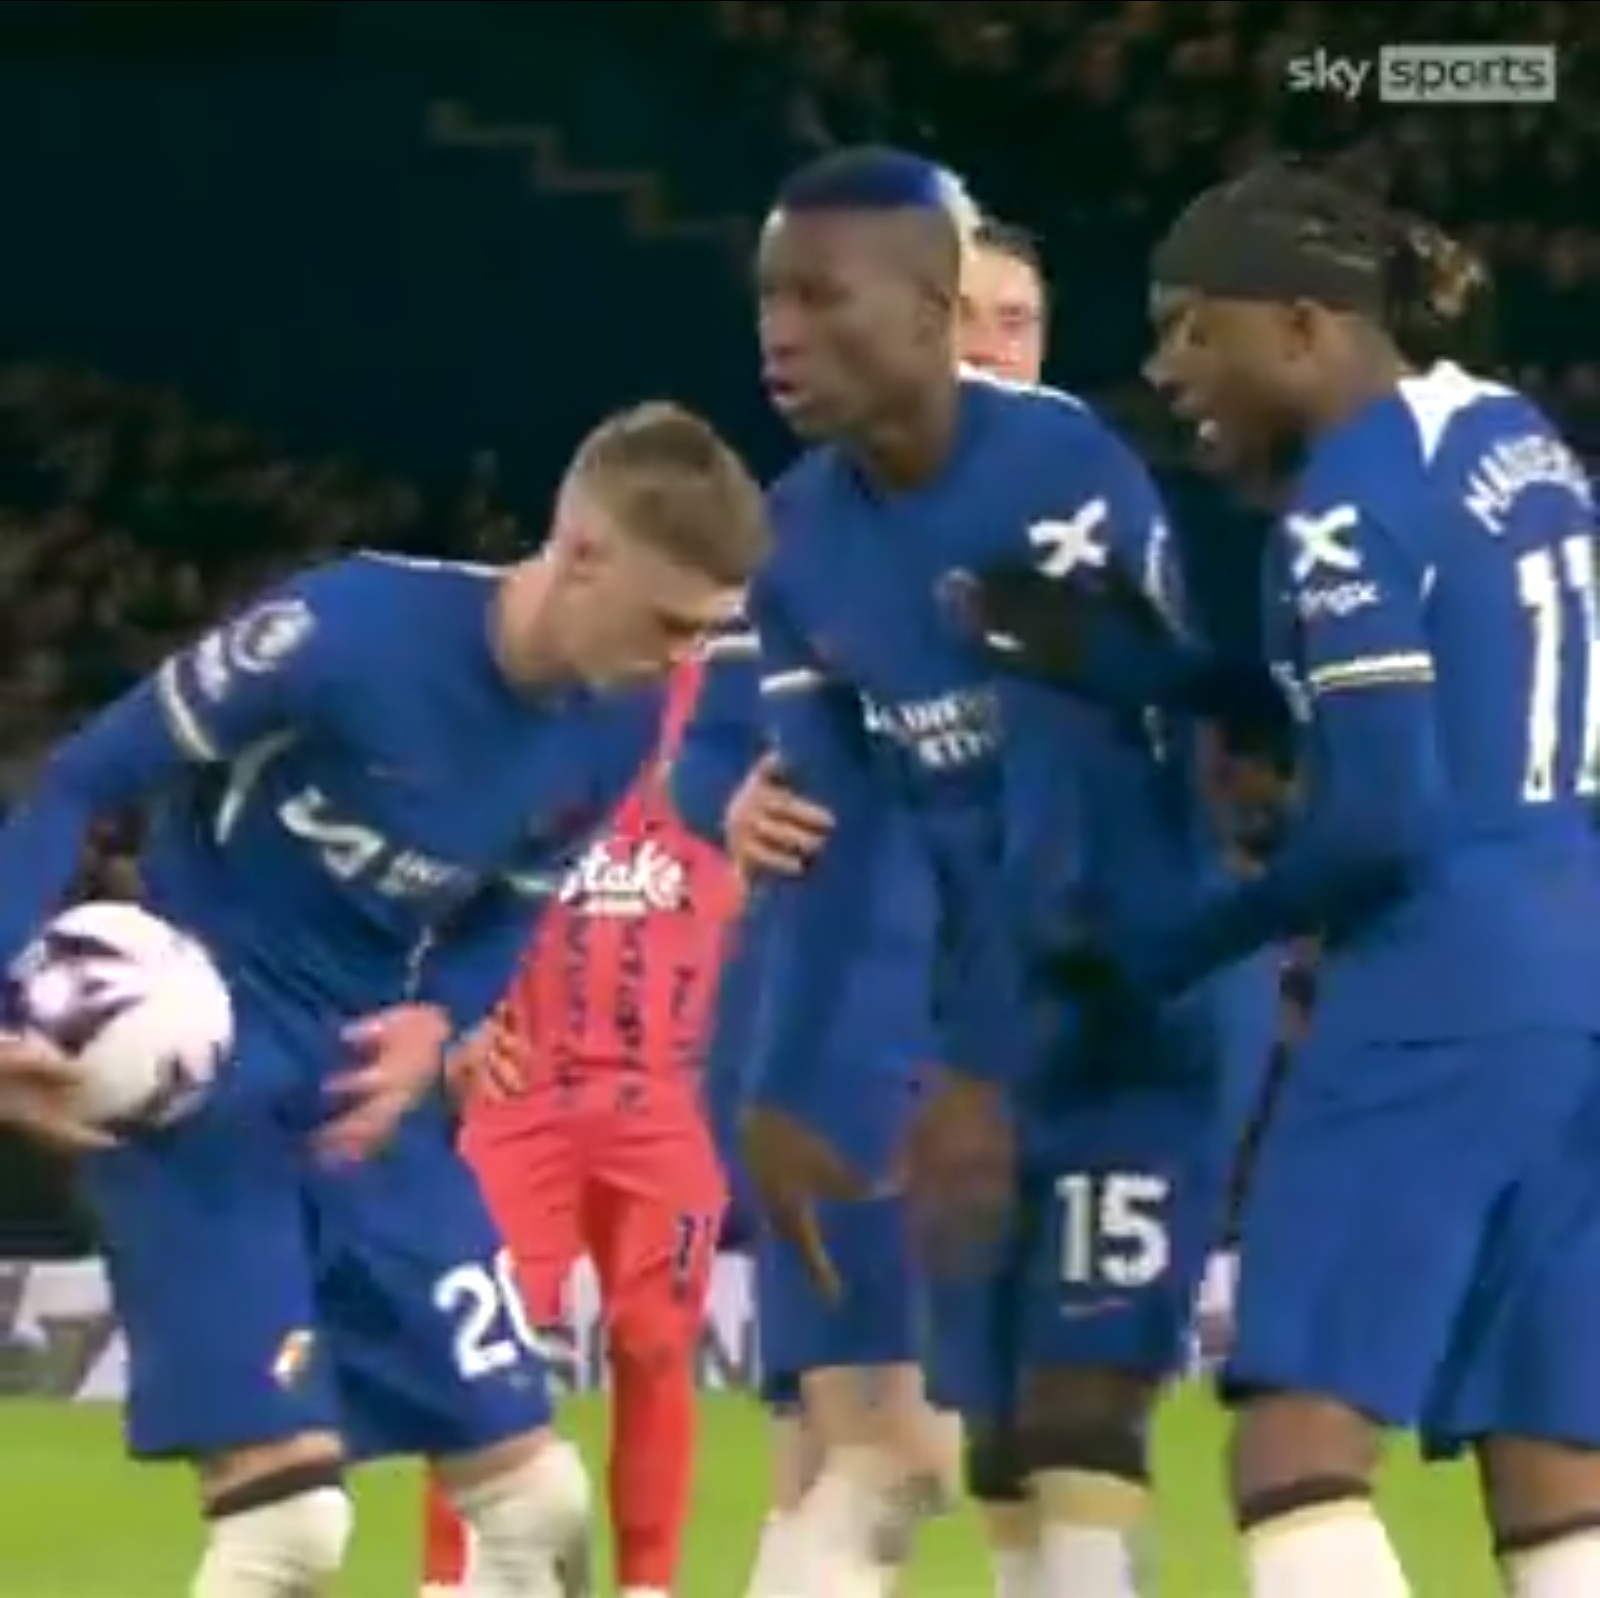 Chelsea’s dominant victory against Everton overshadowed by pathetic penalty incident sparked by Nicolas Jackson